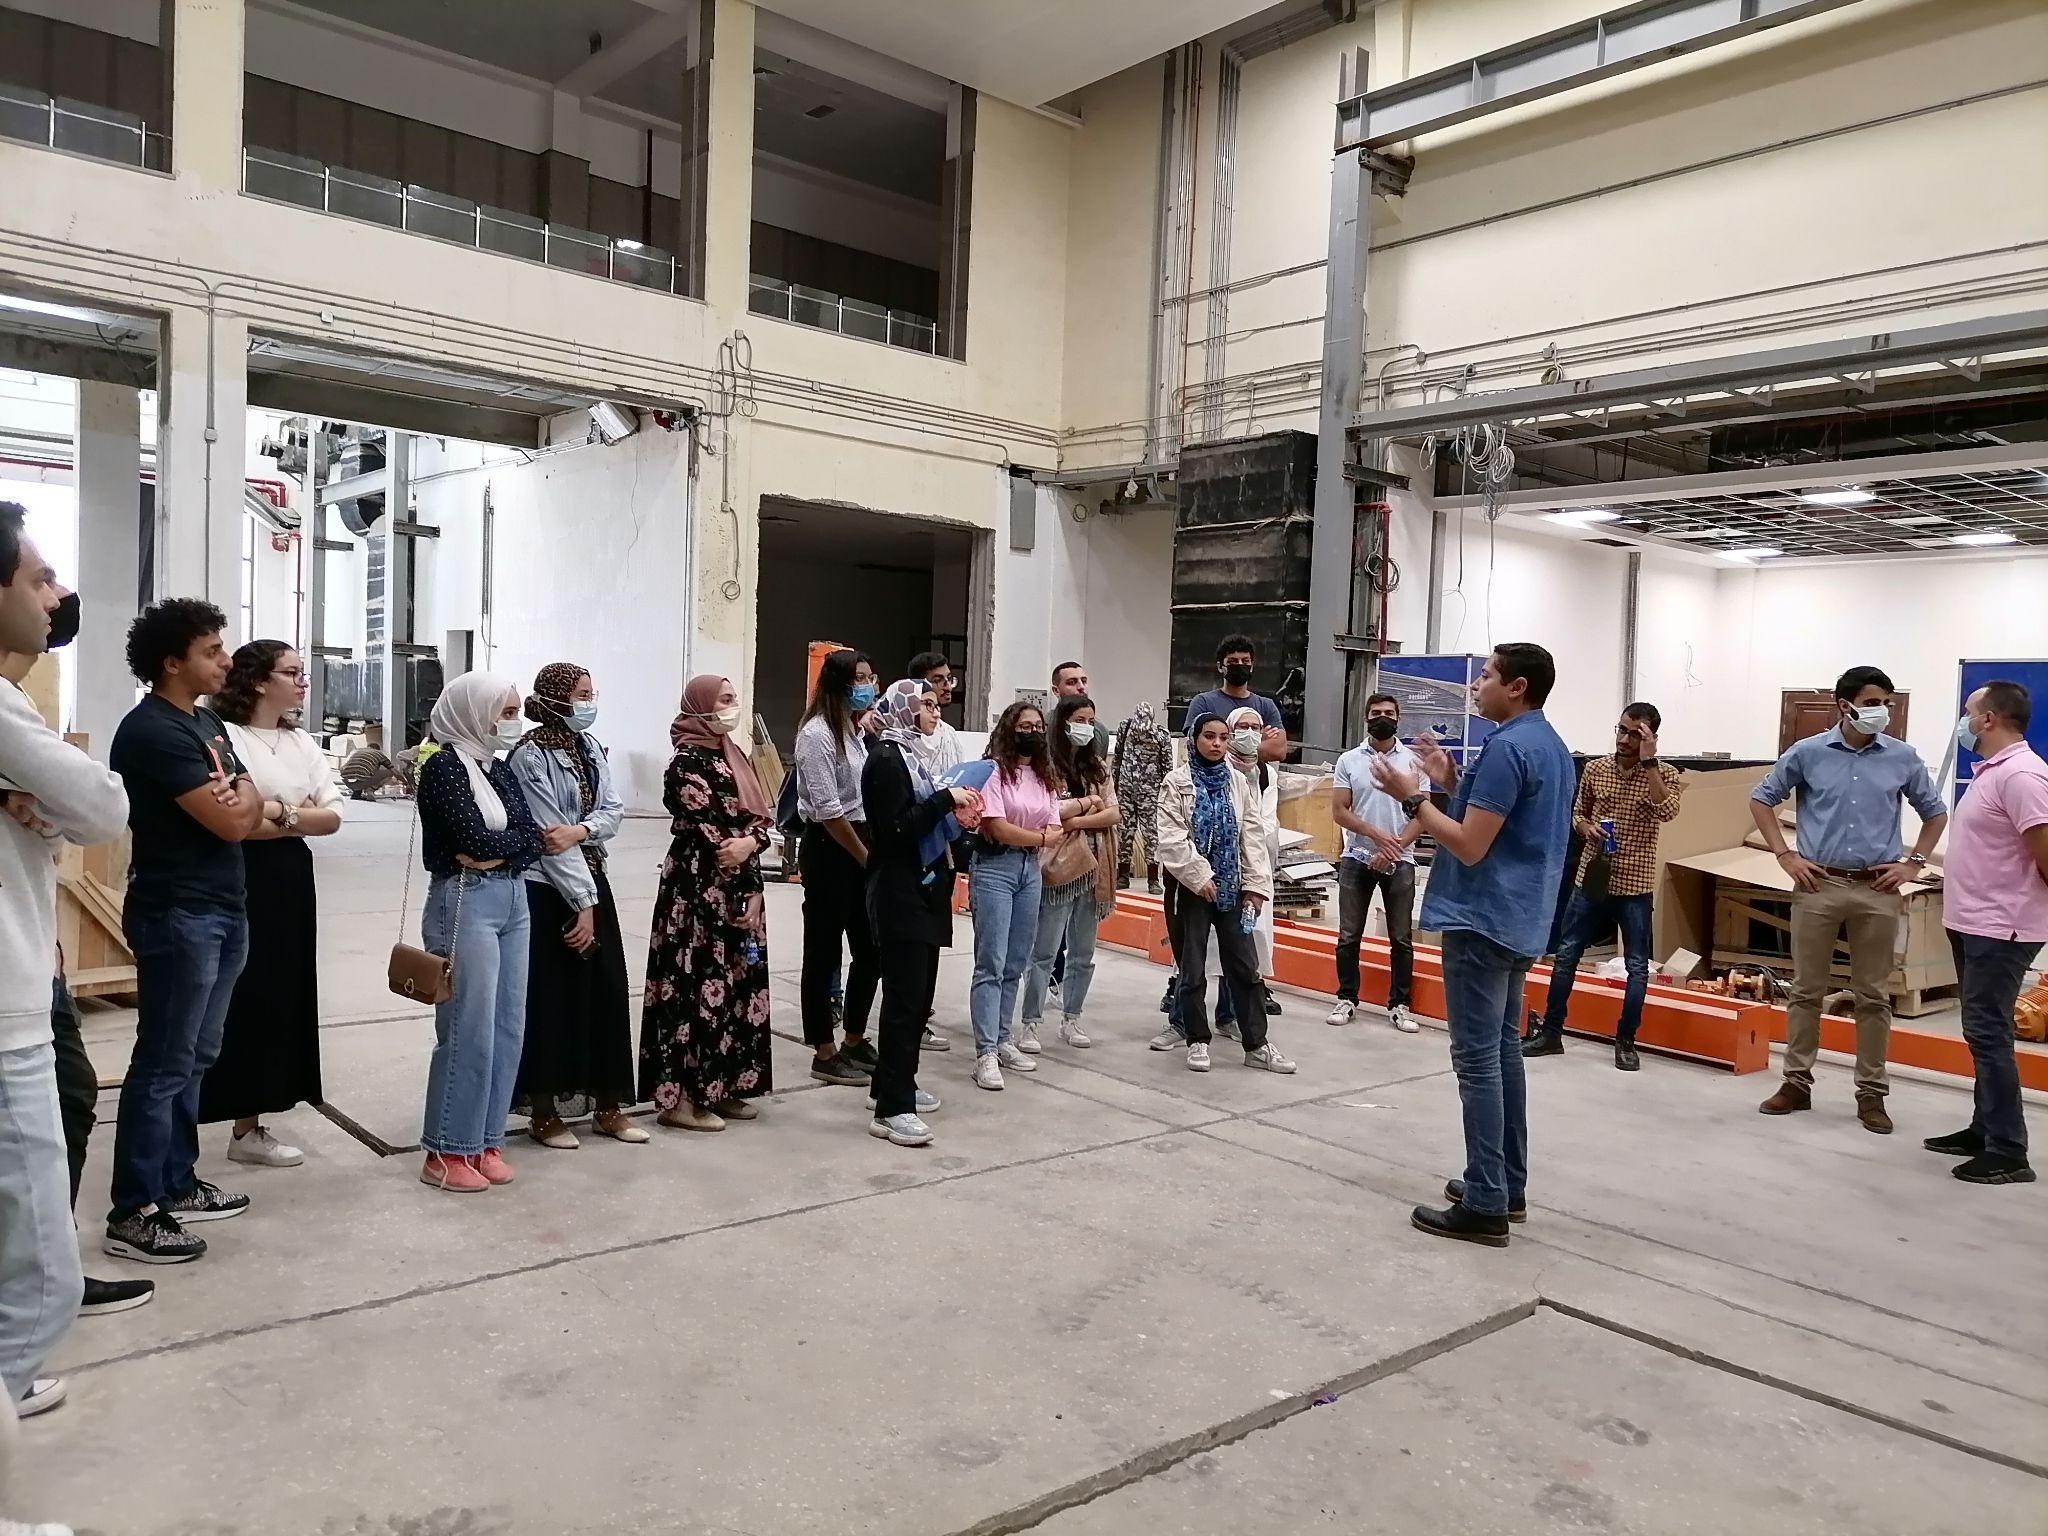 Group of students in a visit to the space agency in Egypt